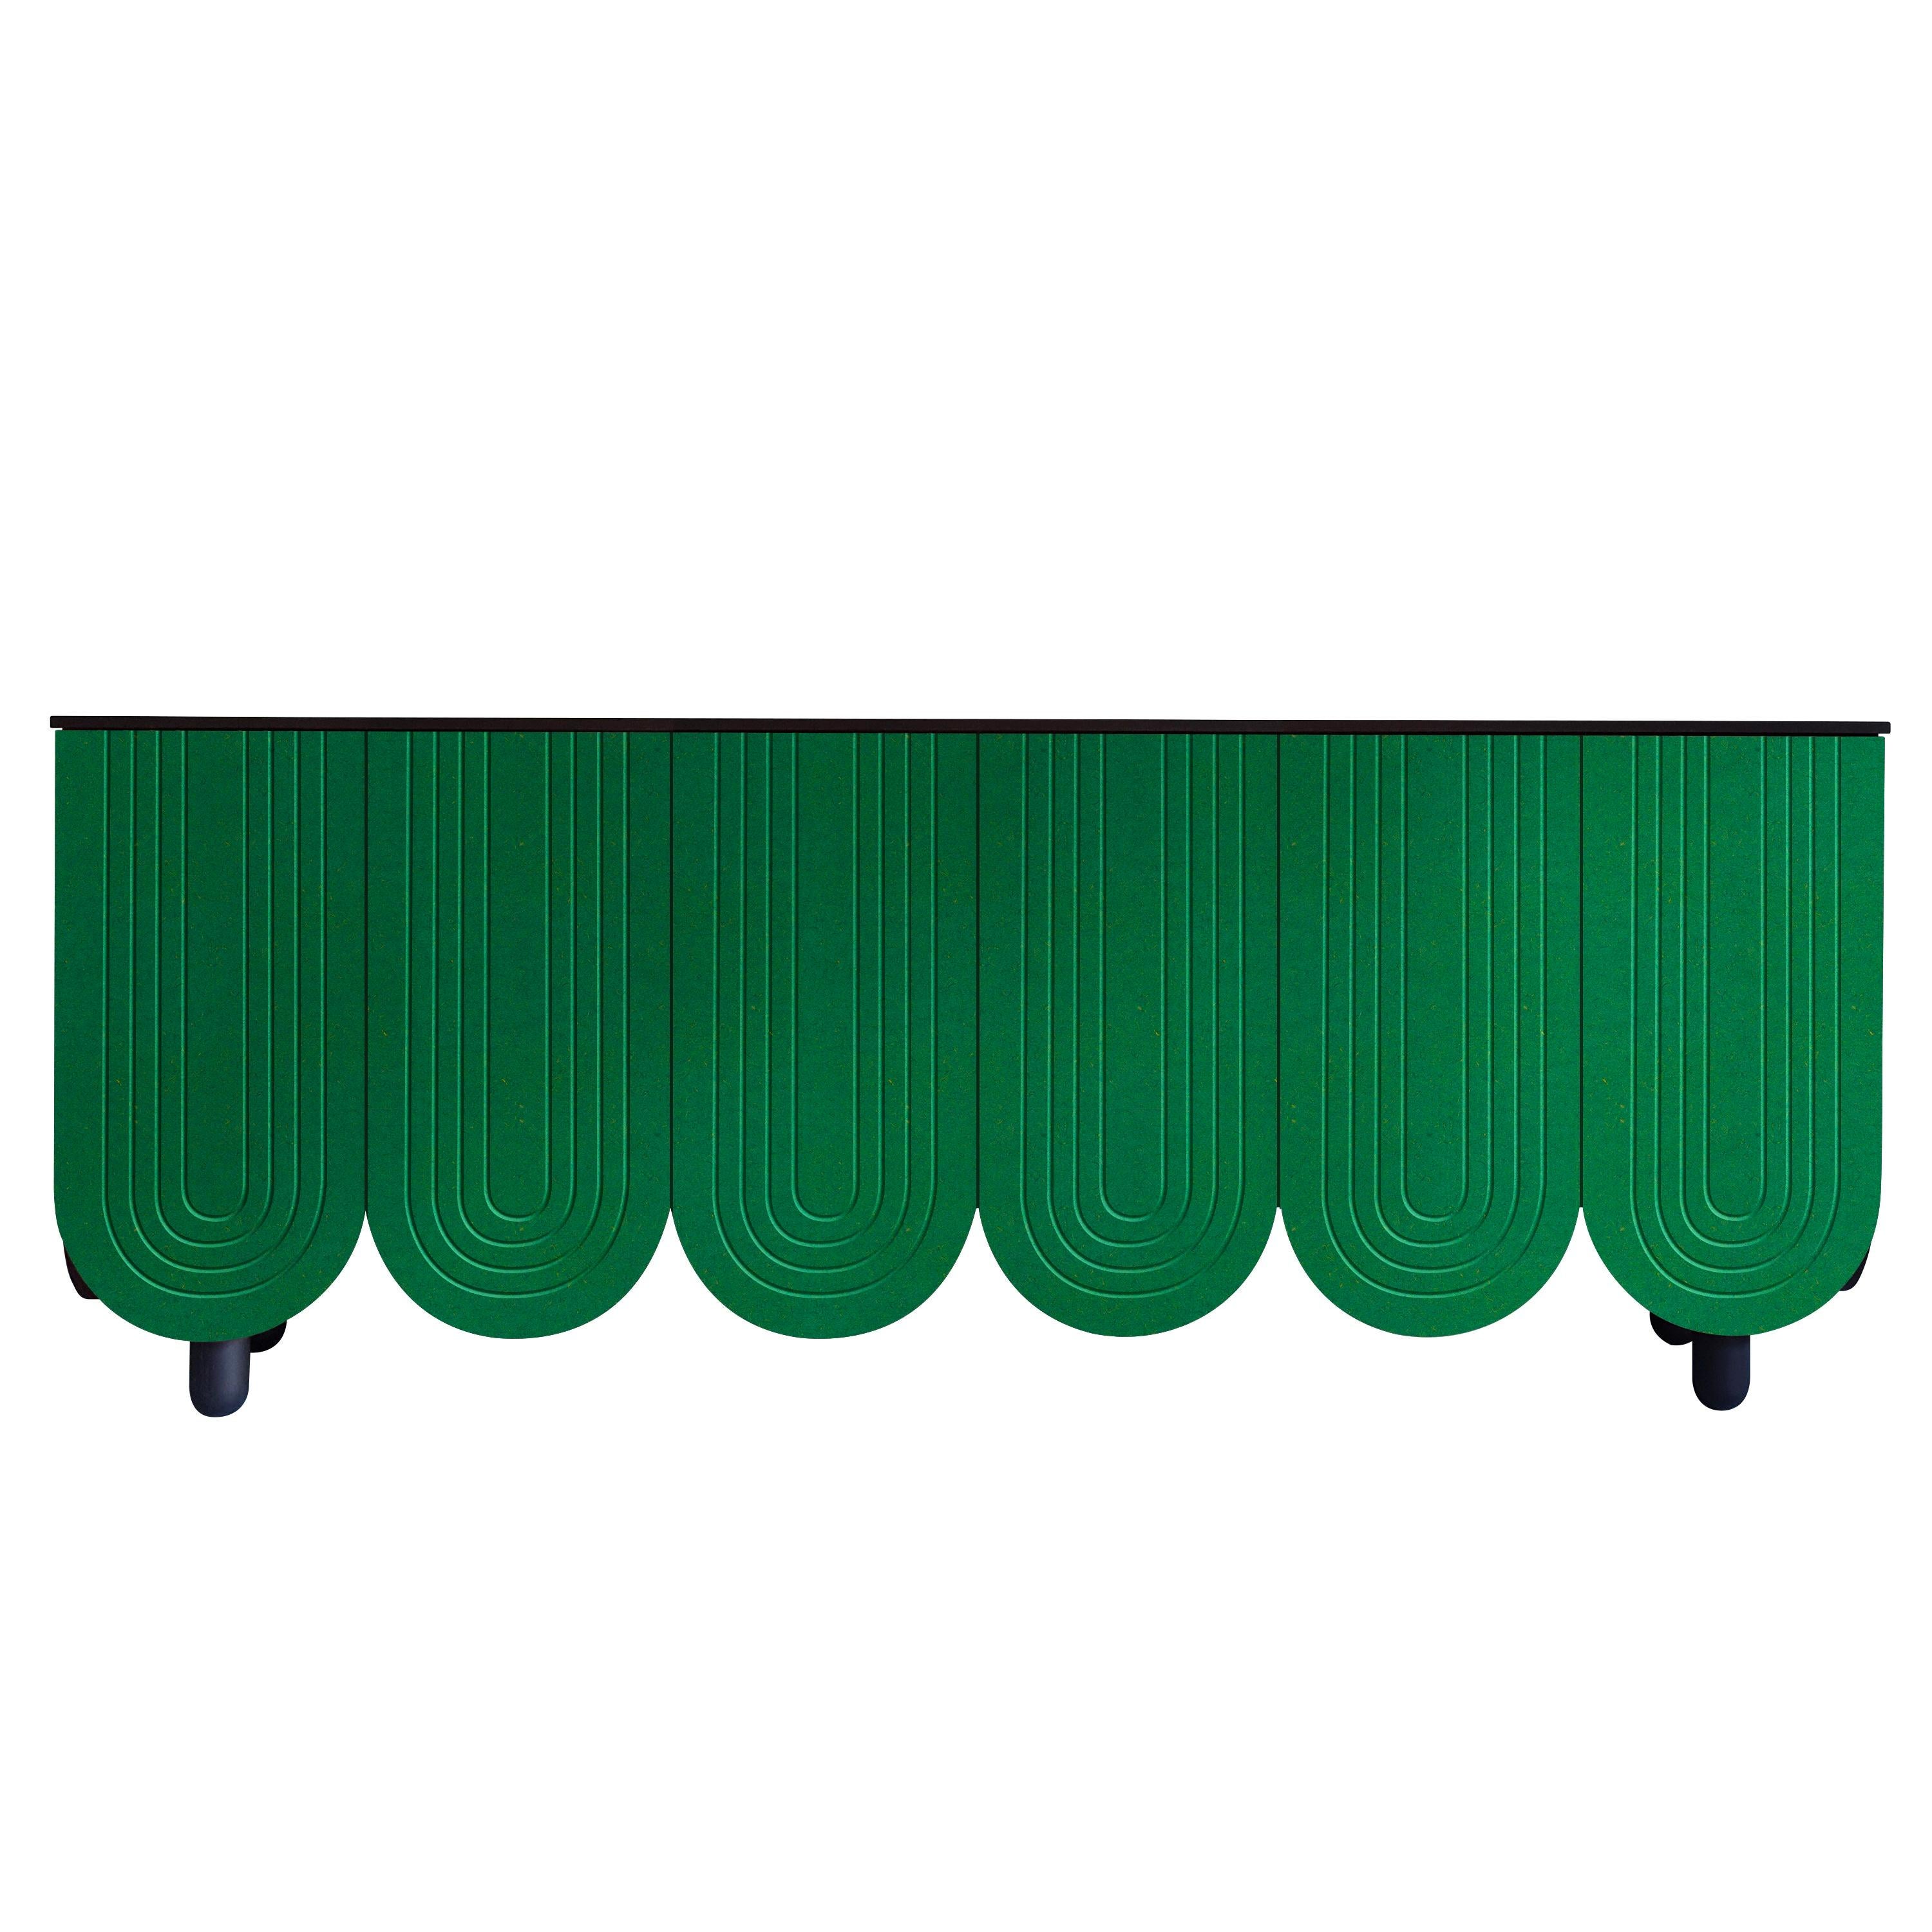 A series of Arch Cabinets made in a choice of chocolatey Brown, Emerald green or bright Blue.

The elegant 6 door version plays with the Arch shape and mirrors it in a series of grooved arches on the doors and sides.
These pieces are quite